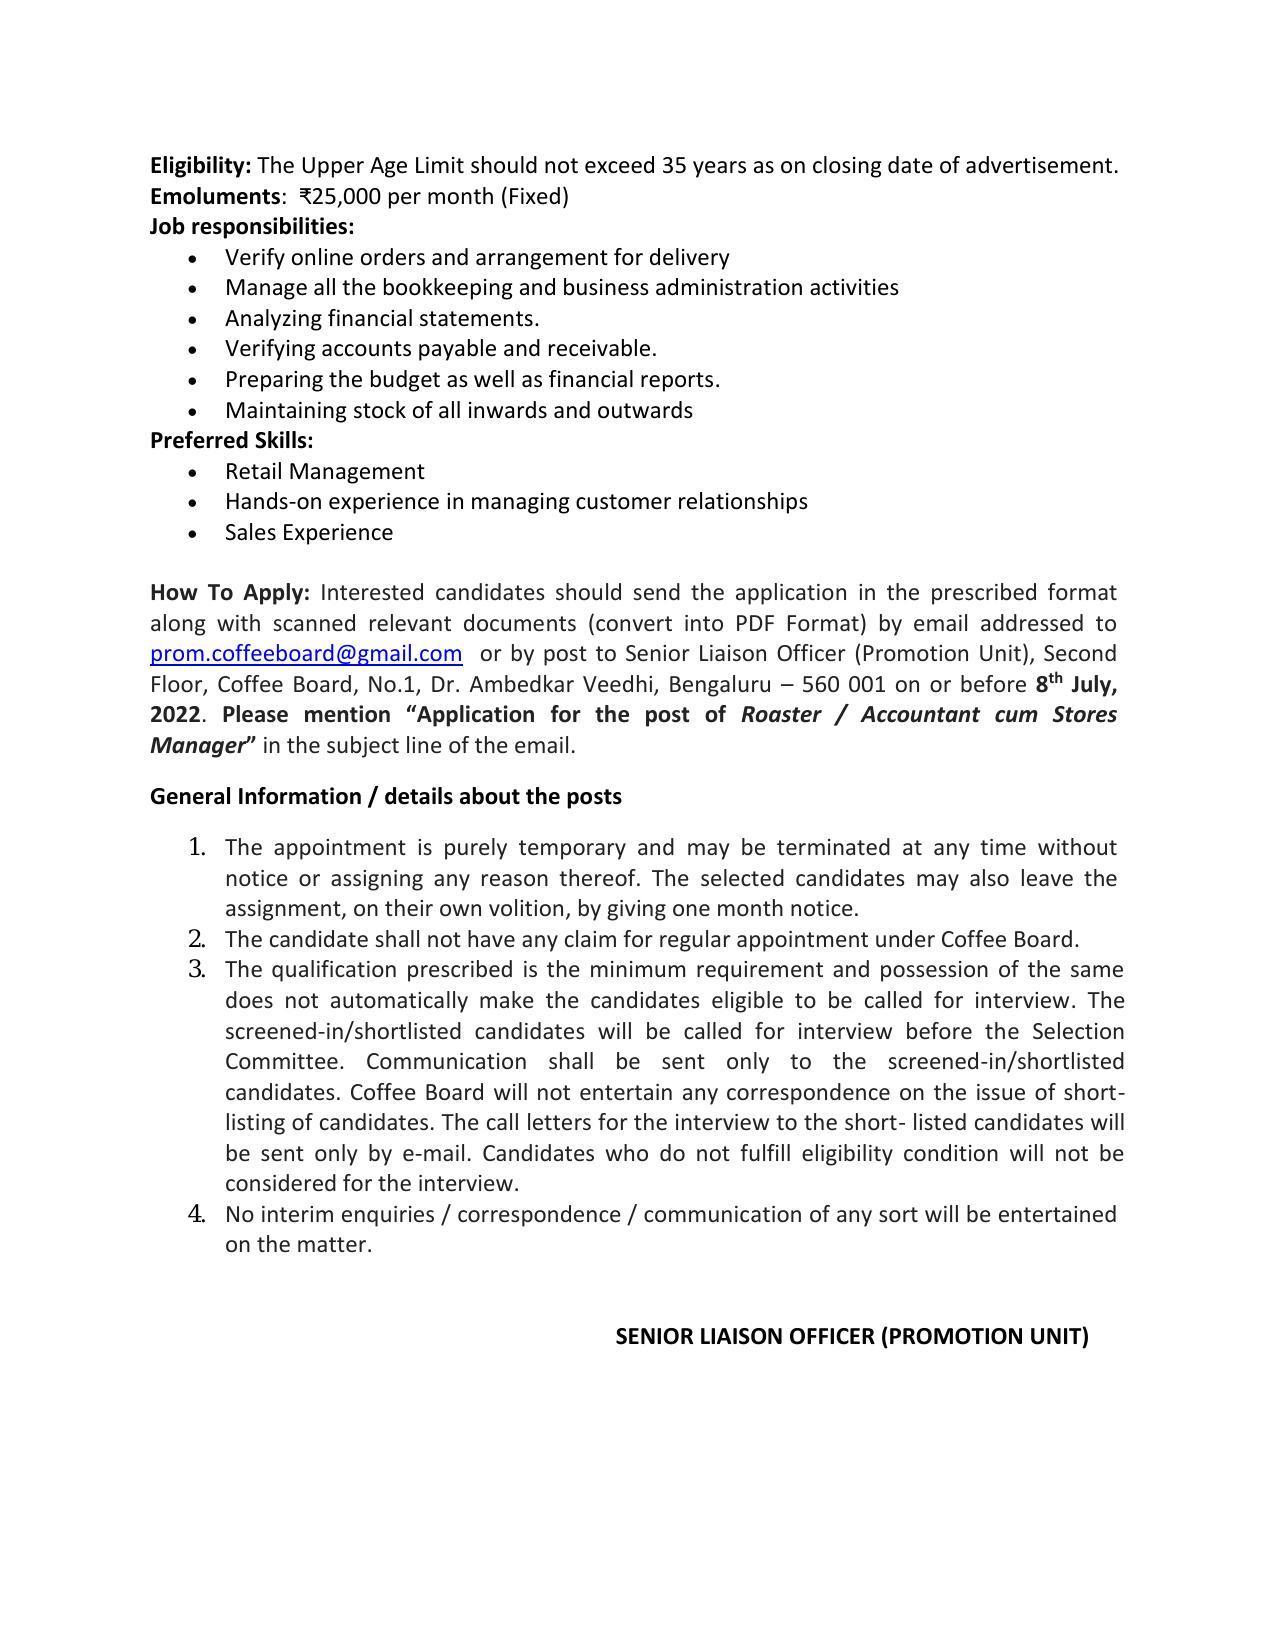 Coffee Board Invites Application for Accountant cum stores manager and Roaster Recruitment 2022 - Page 1